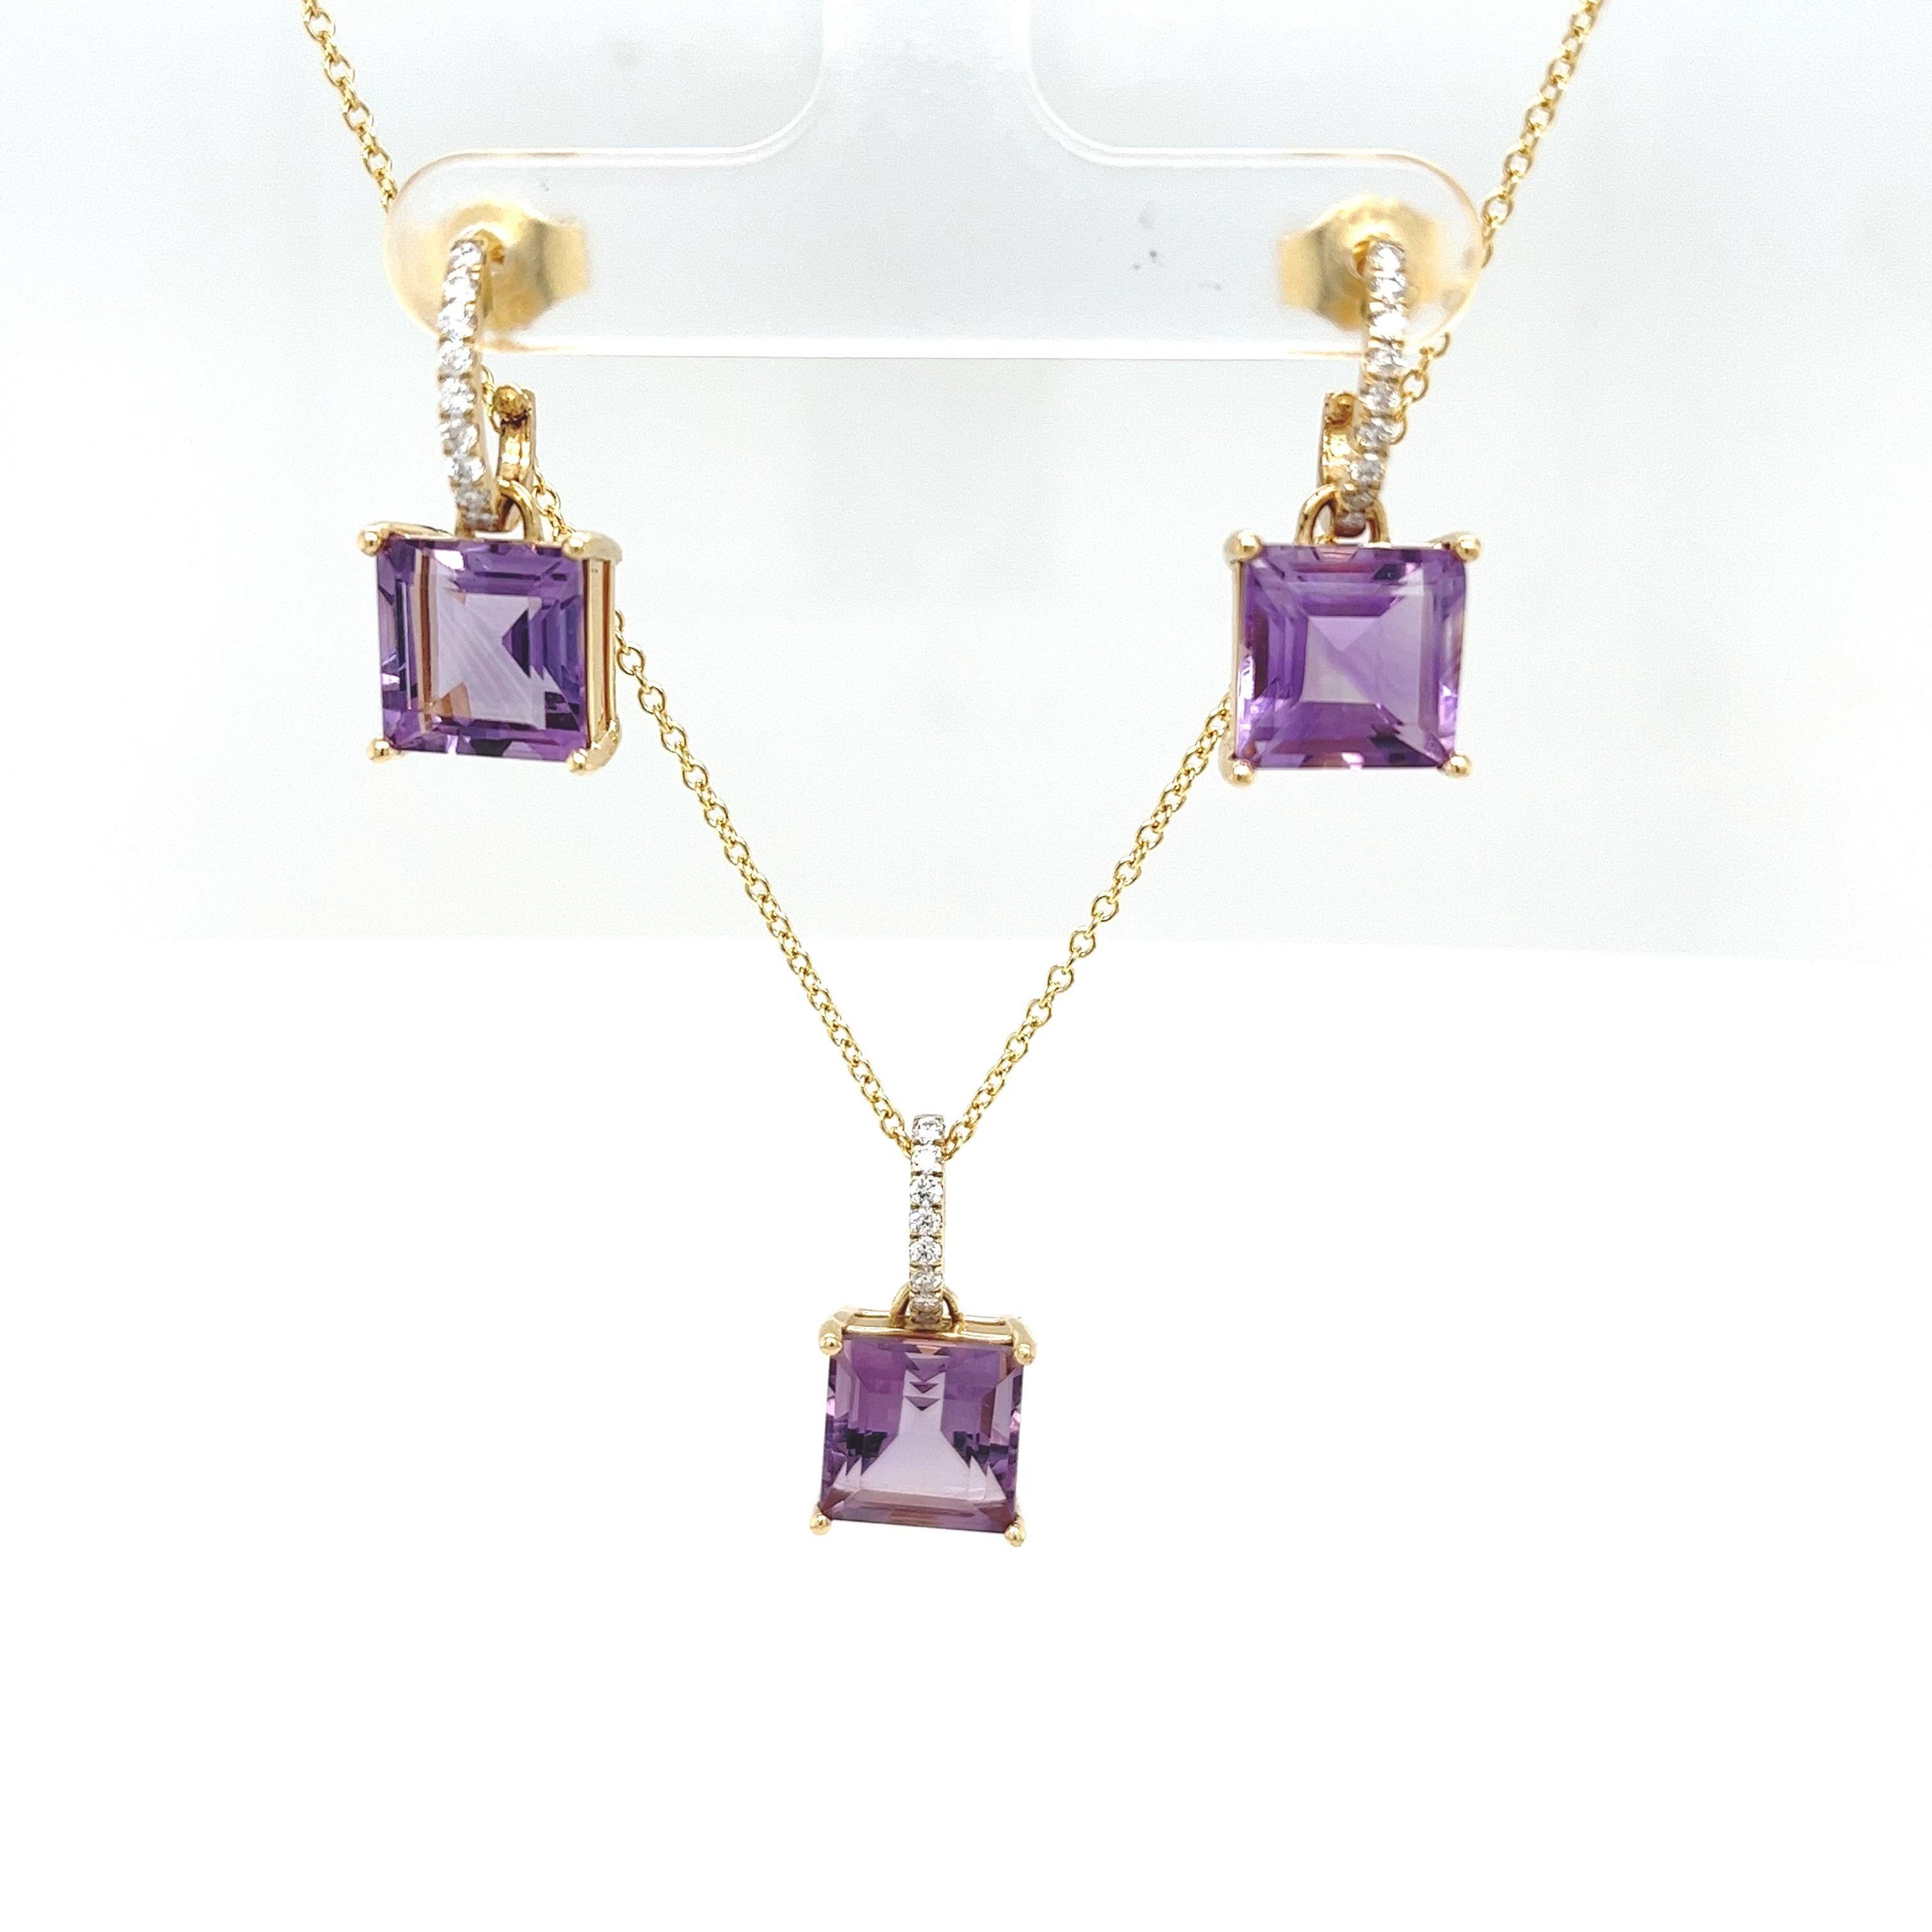 18ct Yellow Gold Diamond & Amethyst Necklace & Earrings Set For Sale 2